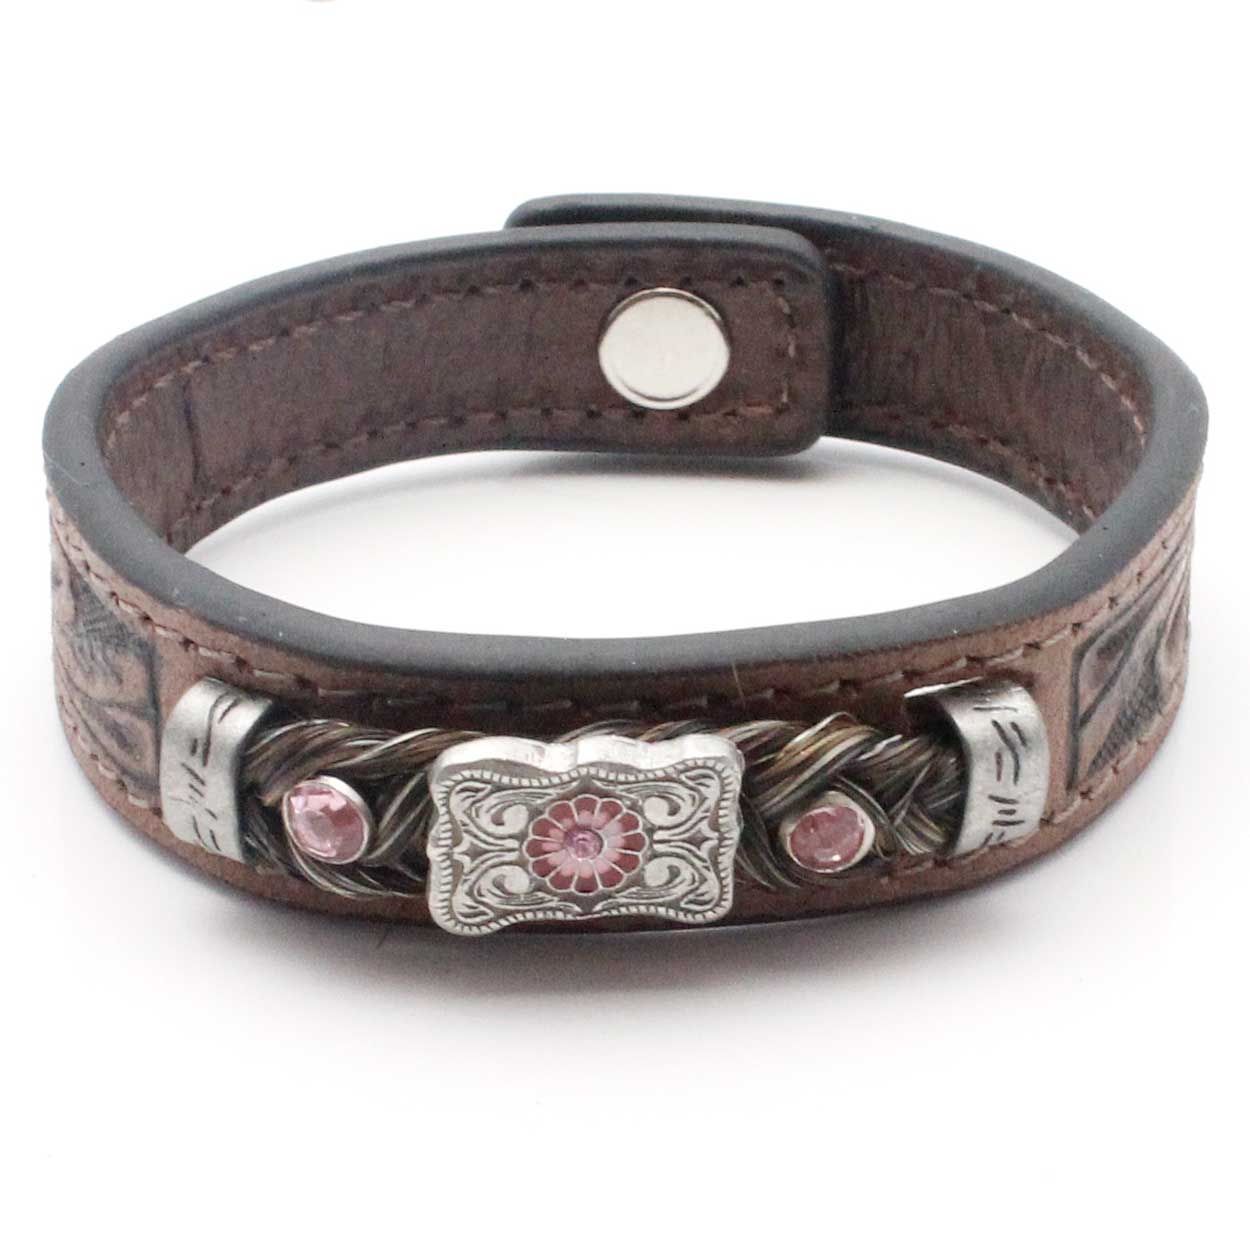 Stamped Leather & Black Horse Hair Bracelet With Metal Accents - Pink